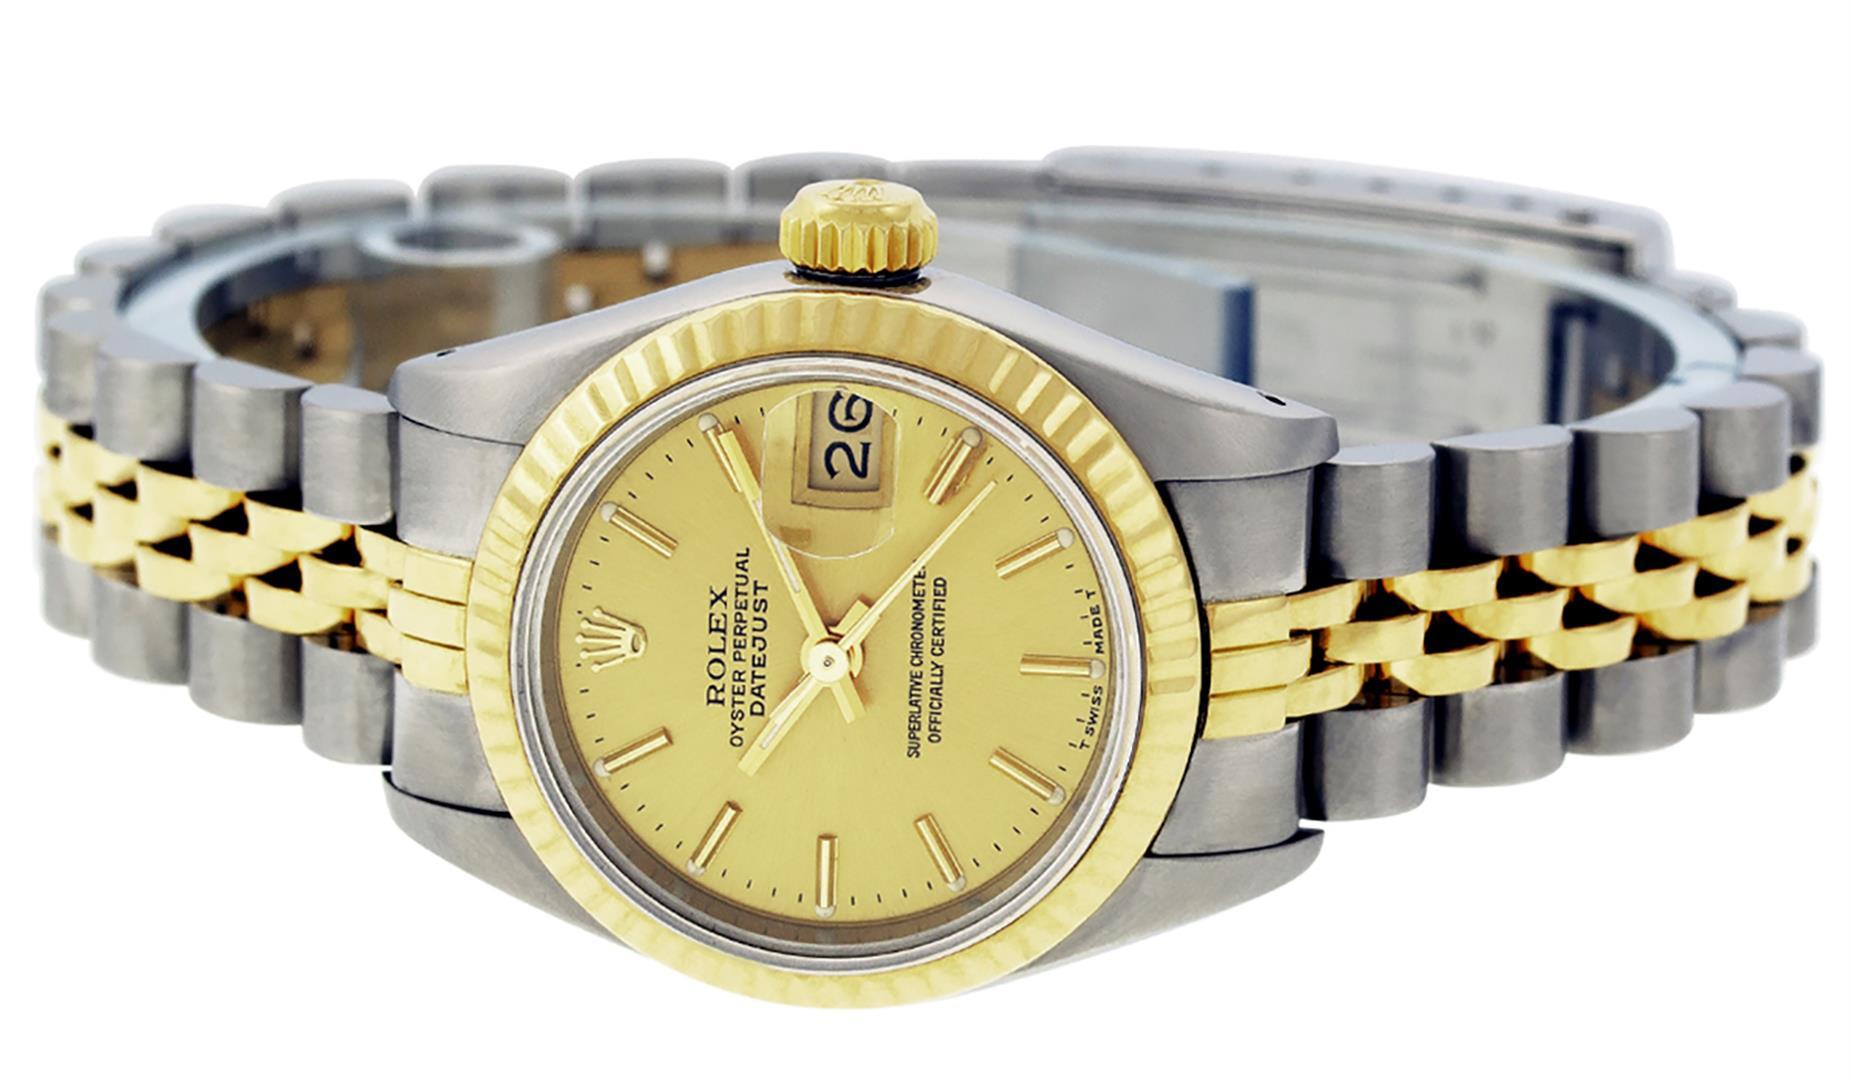 Rolex Ladies 2T Yellow Gold & Stainless Steel Champagne Index Wristwatch 26MM